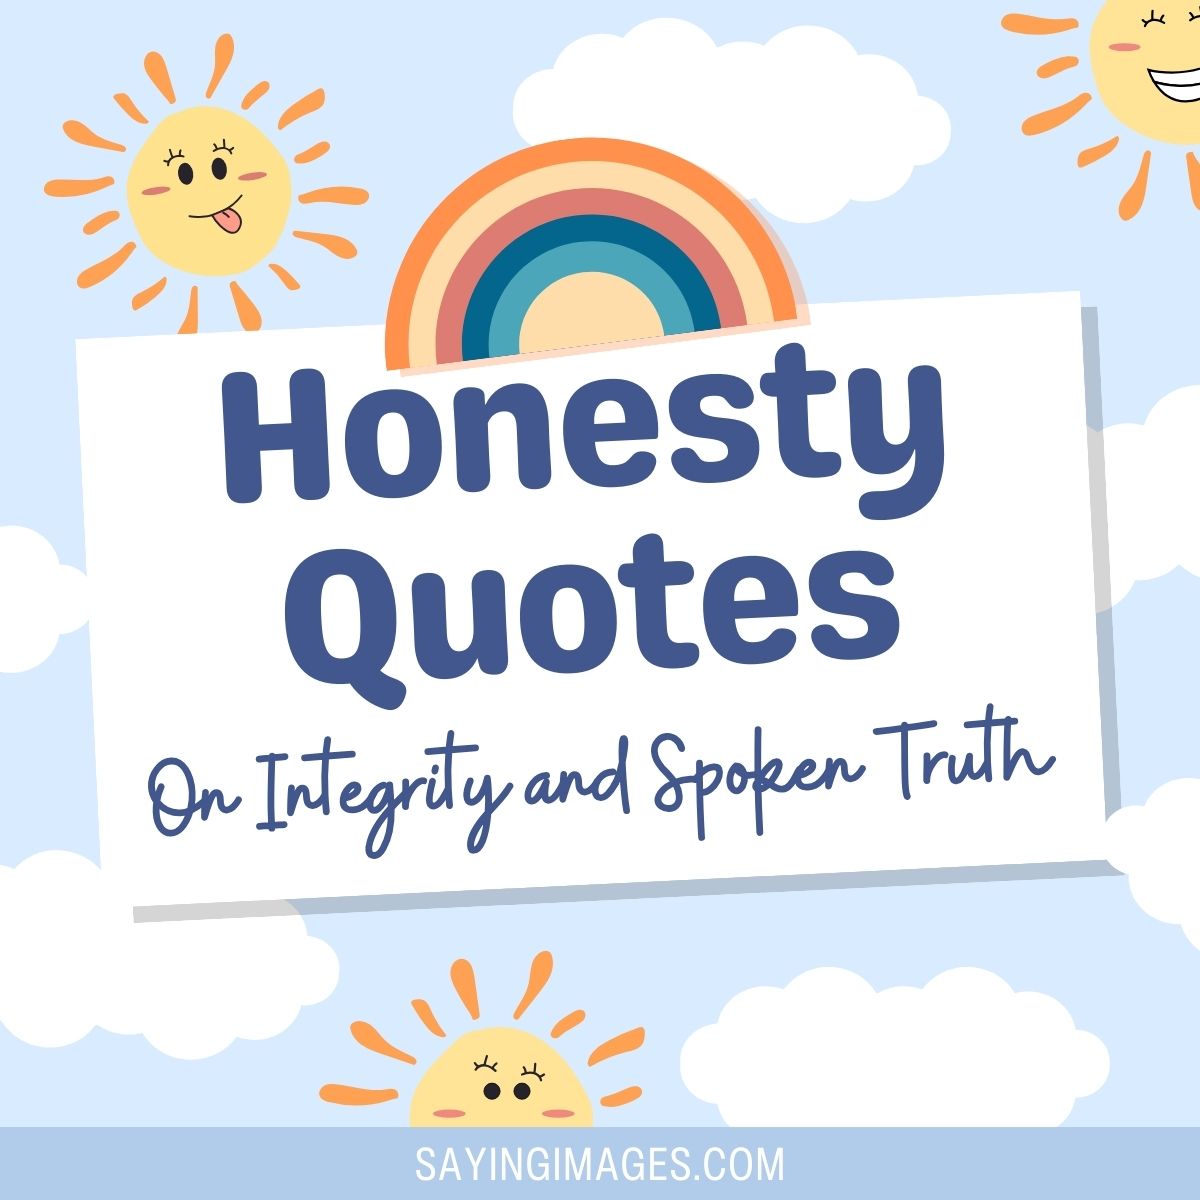 33 Honesty Quotes On Integrity and Spoken Truth